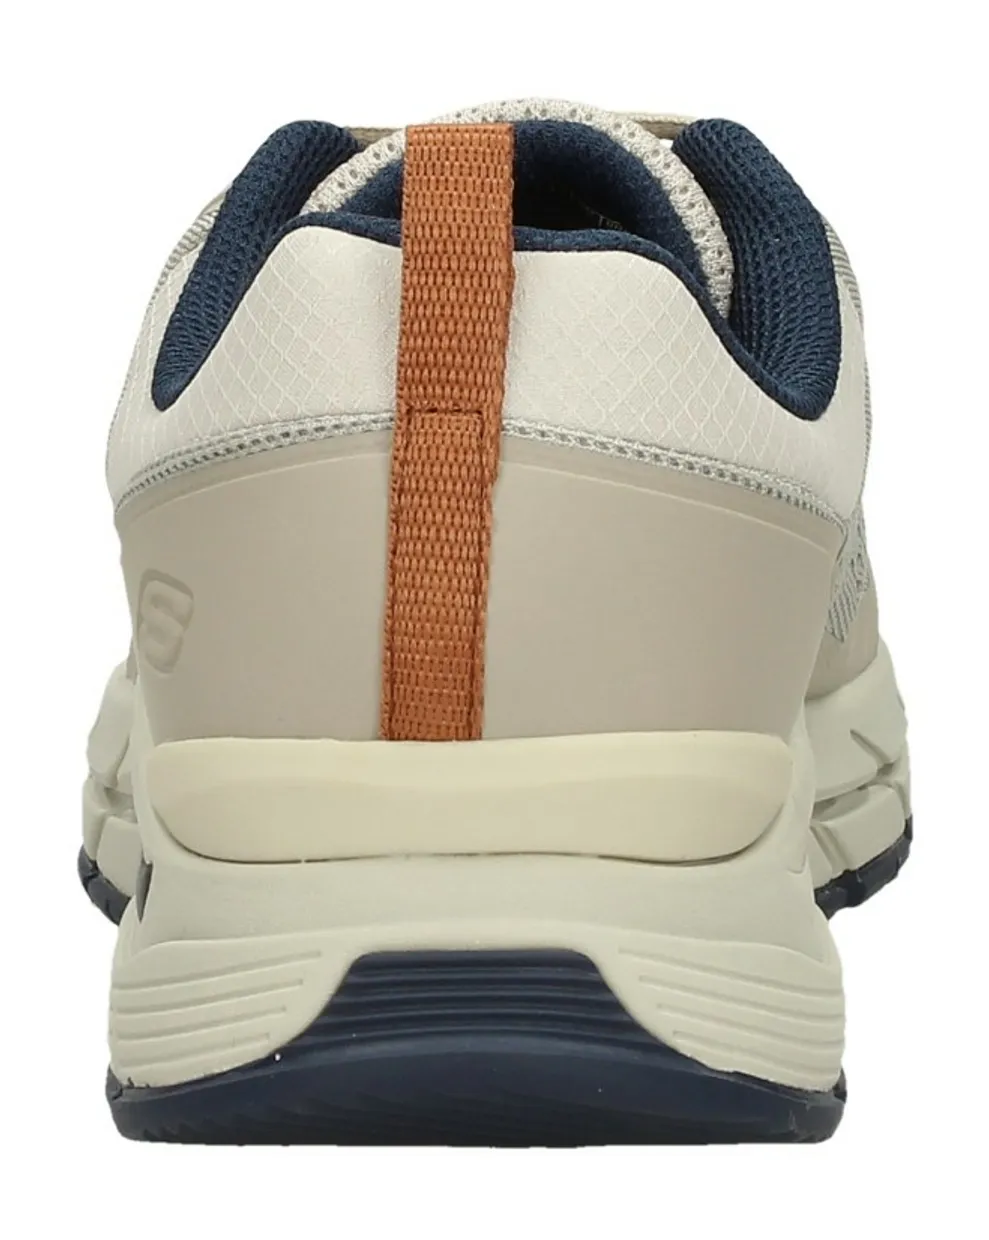 Skechers Arch Fit Baxter - Pendroy